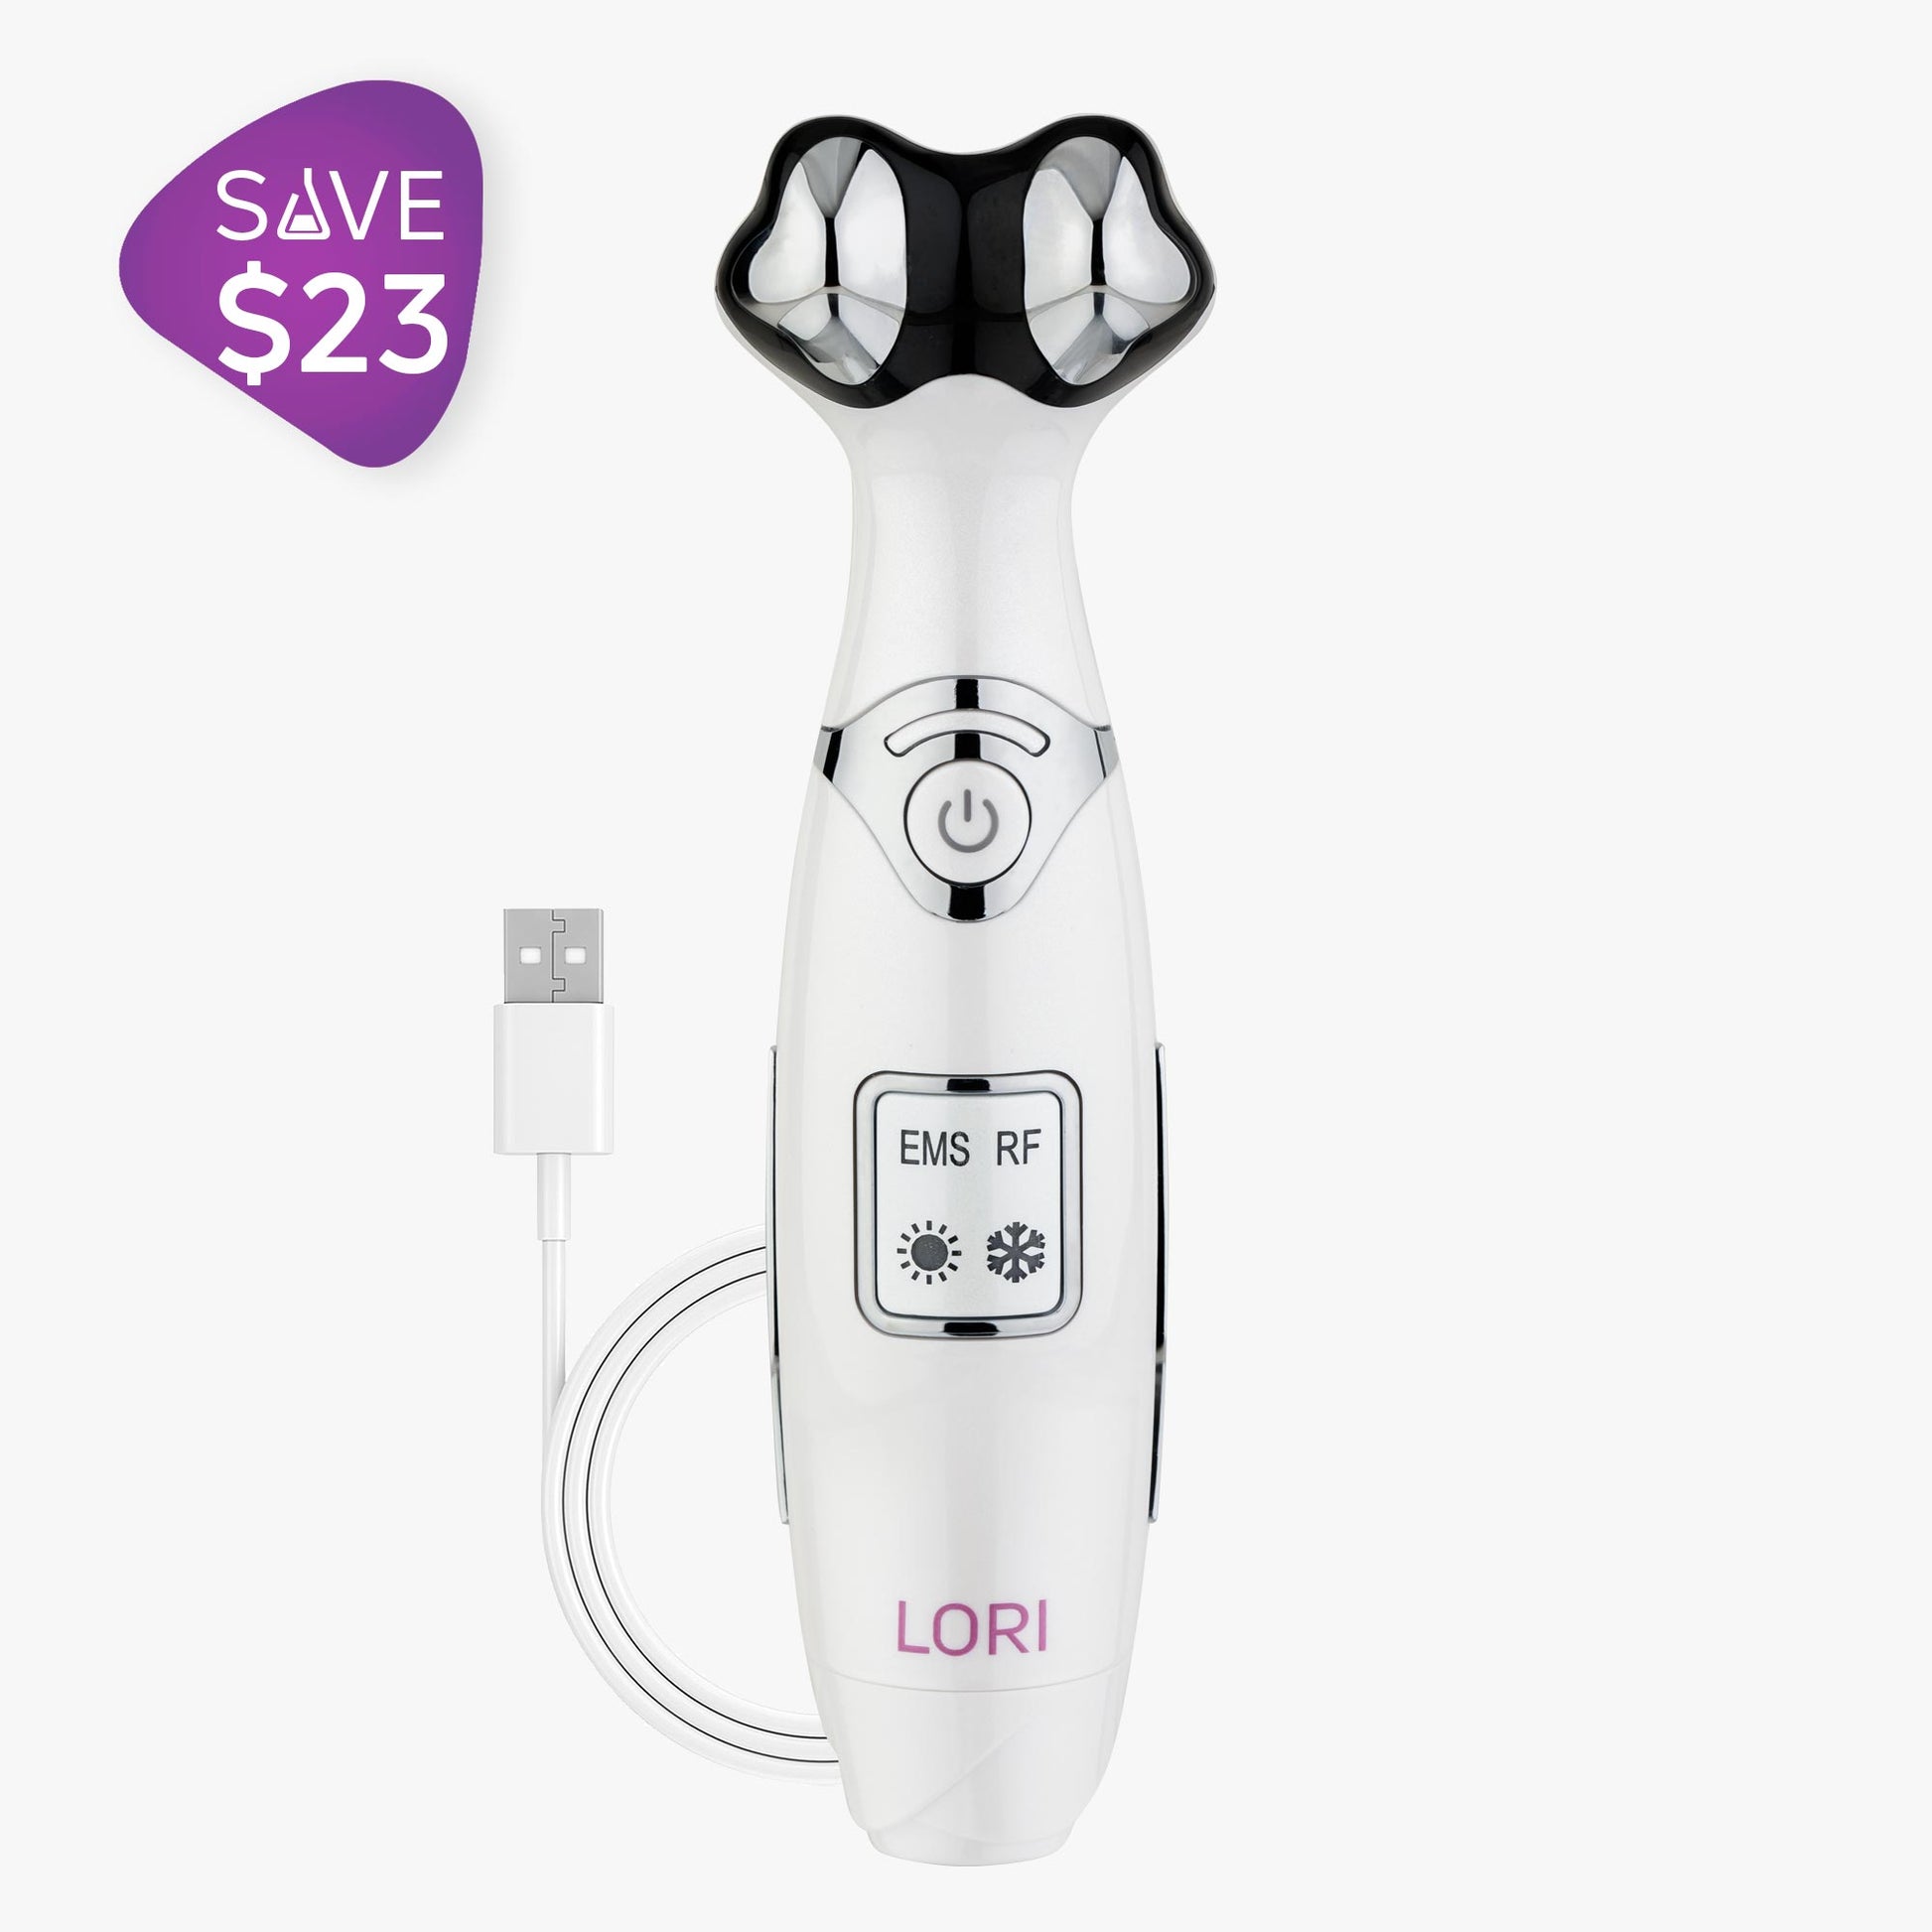 Lori Eyes & Lips facial massager with USB charger, sustainably crafted for eco-friendly skincare routines by Spa Sciences.